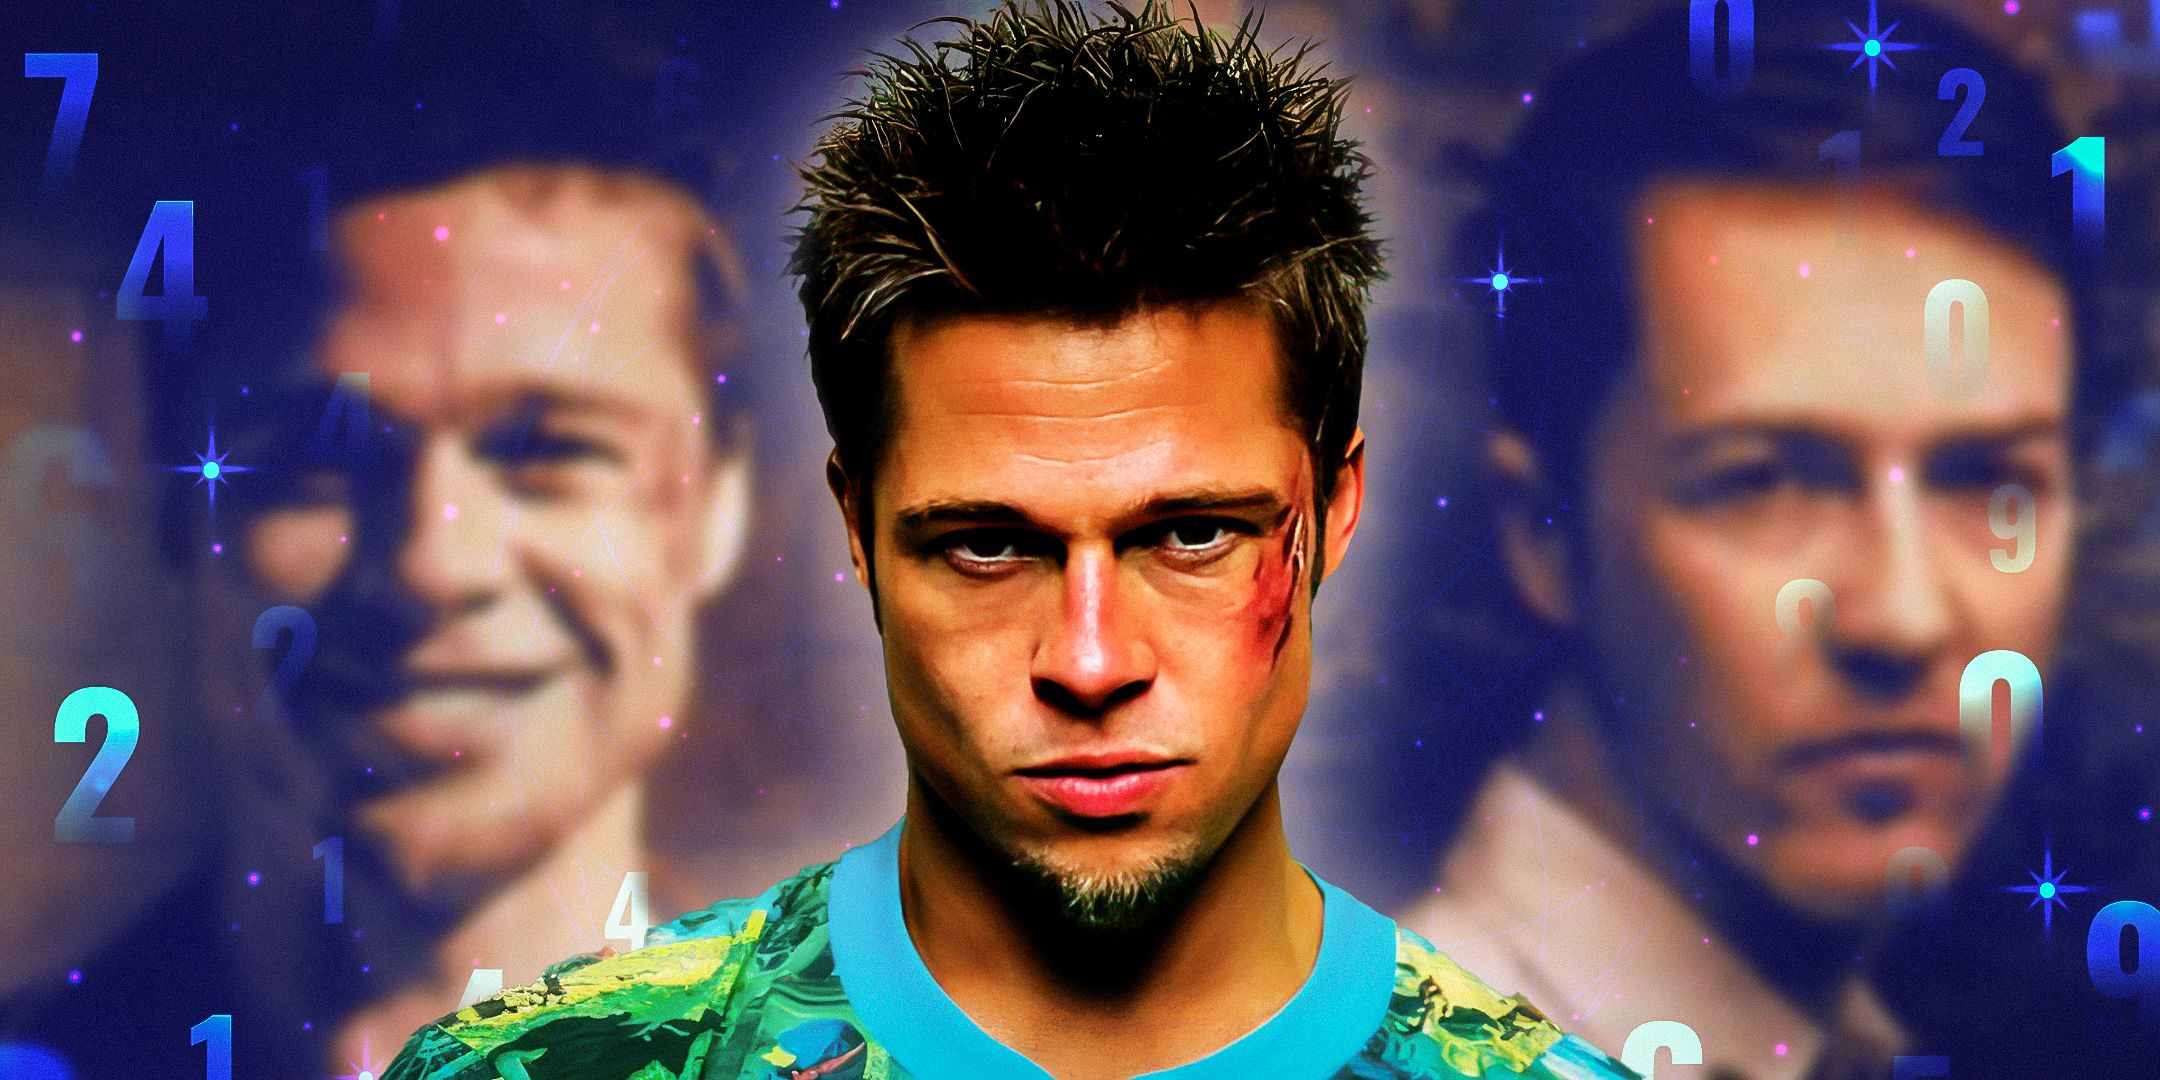 How old was Brad Pitt in Fight Club